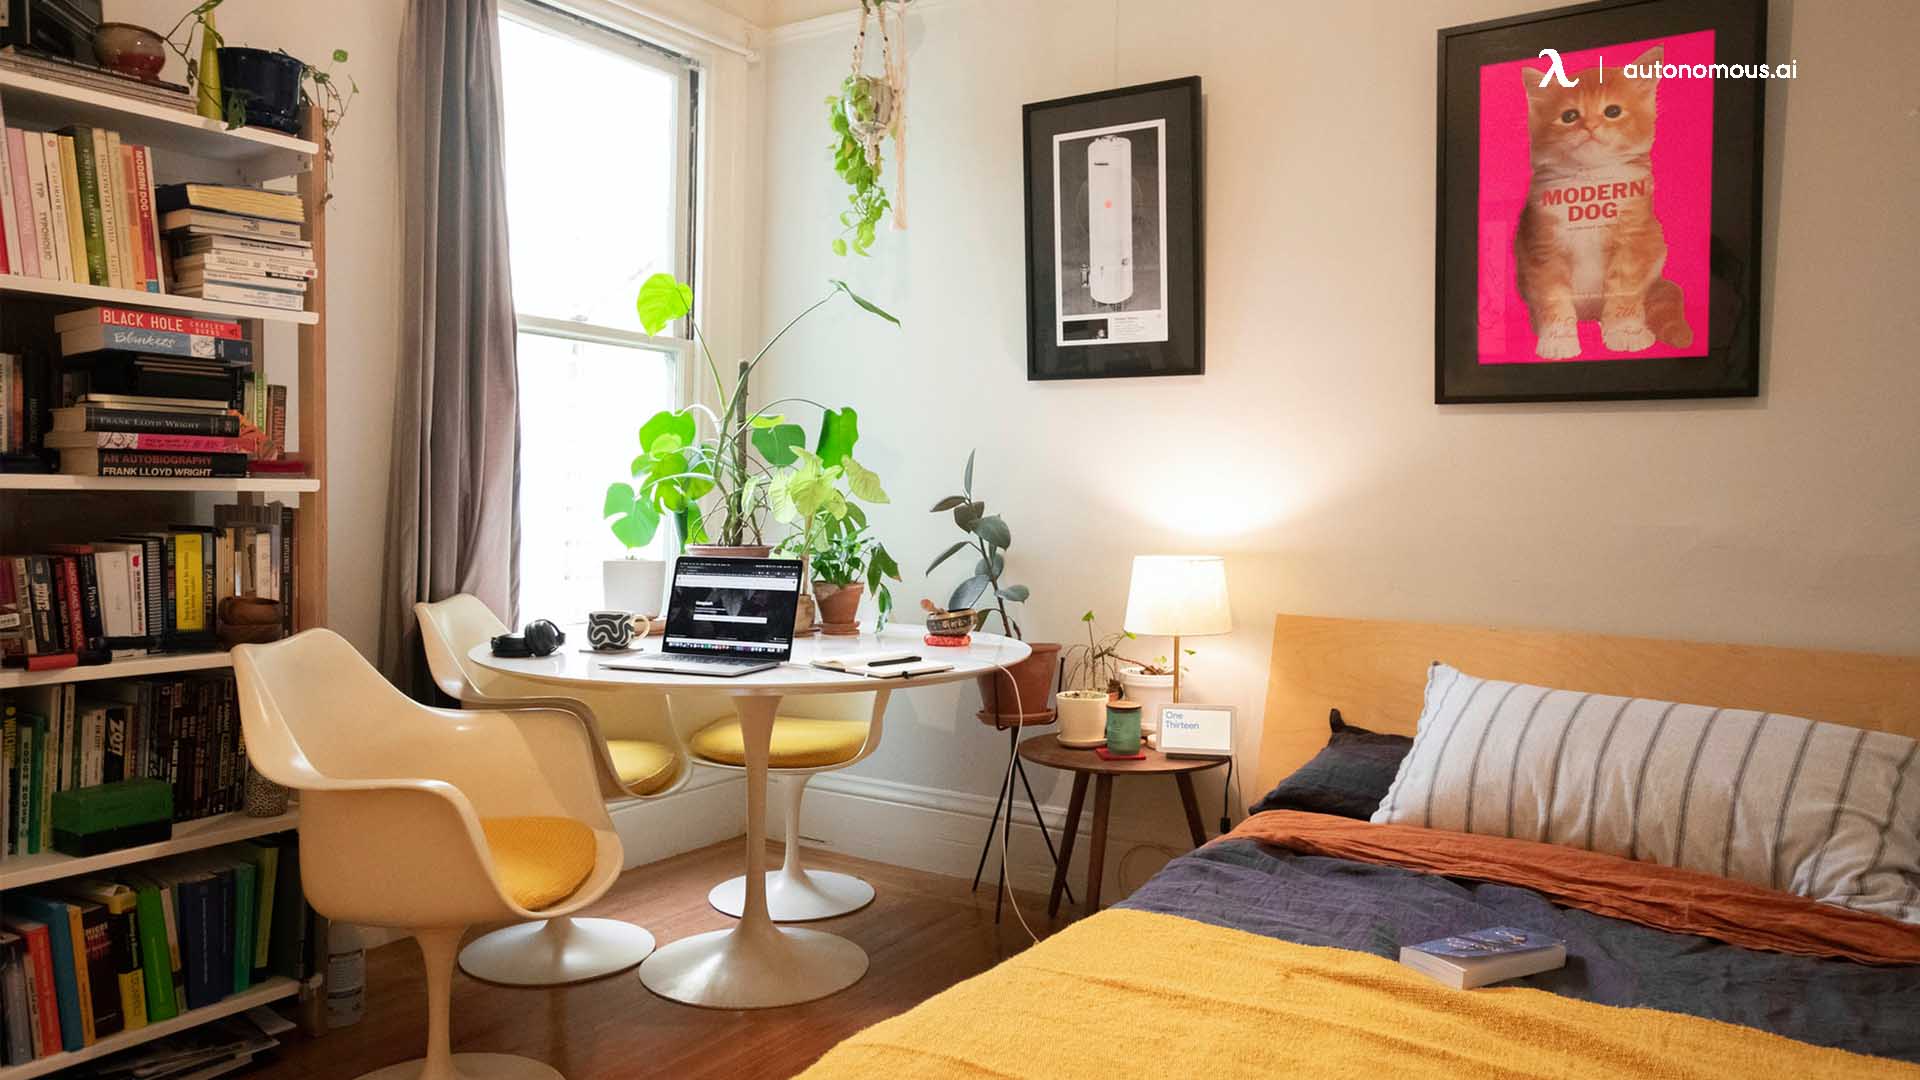 How do you set up an office in a small bedroom